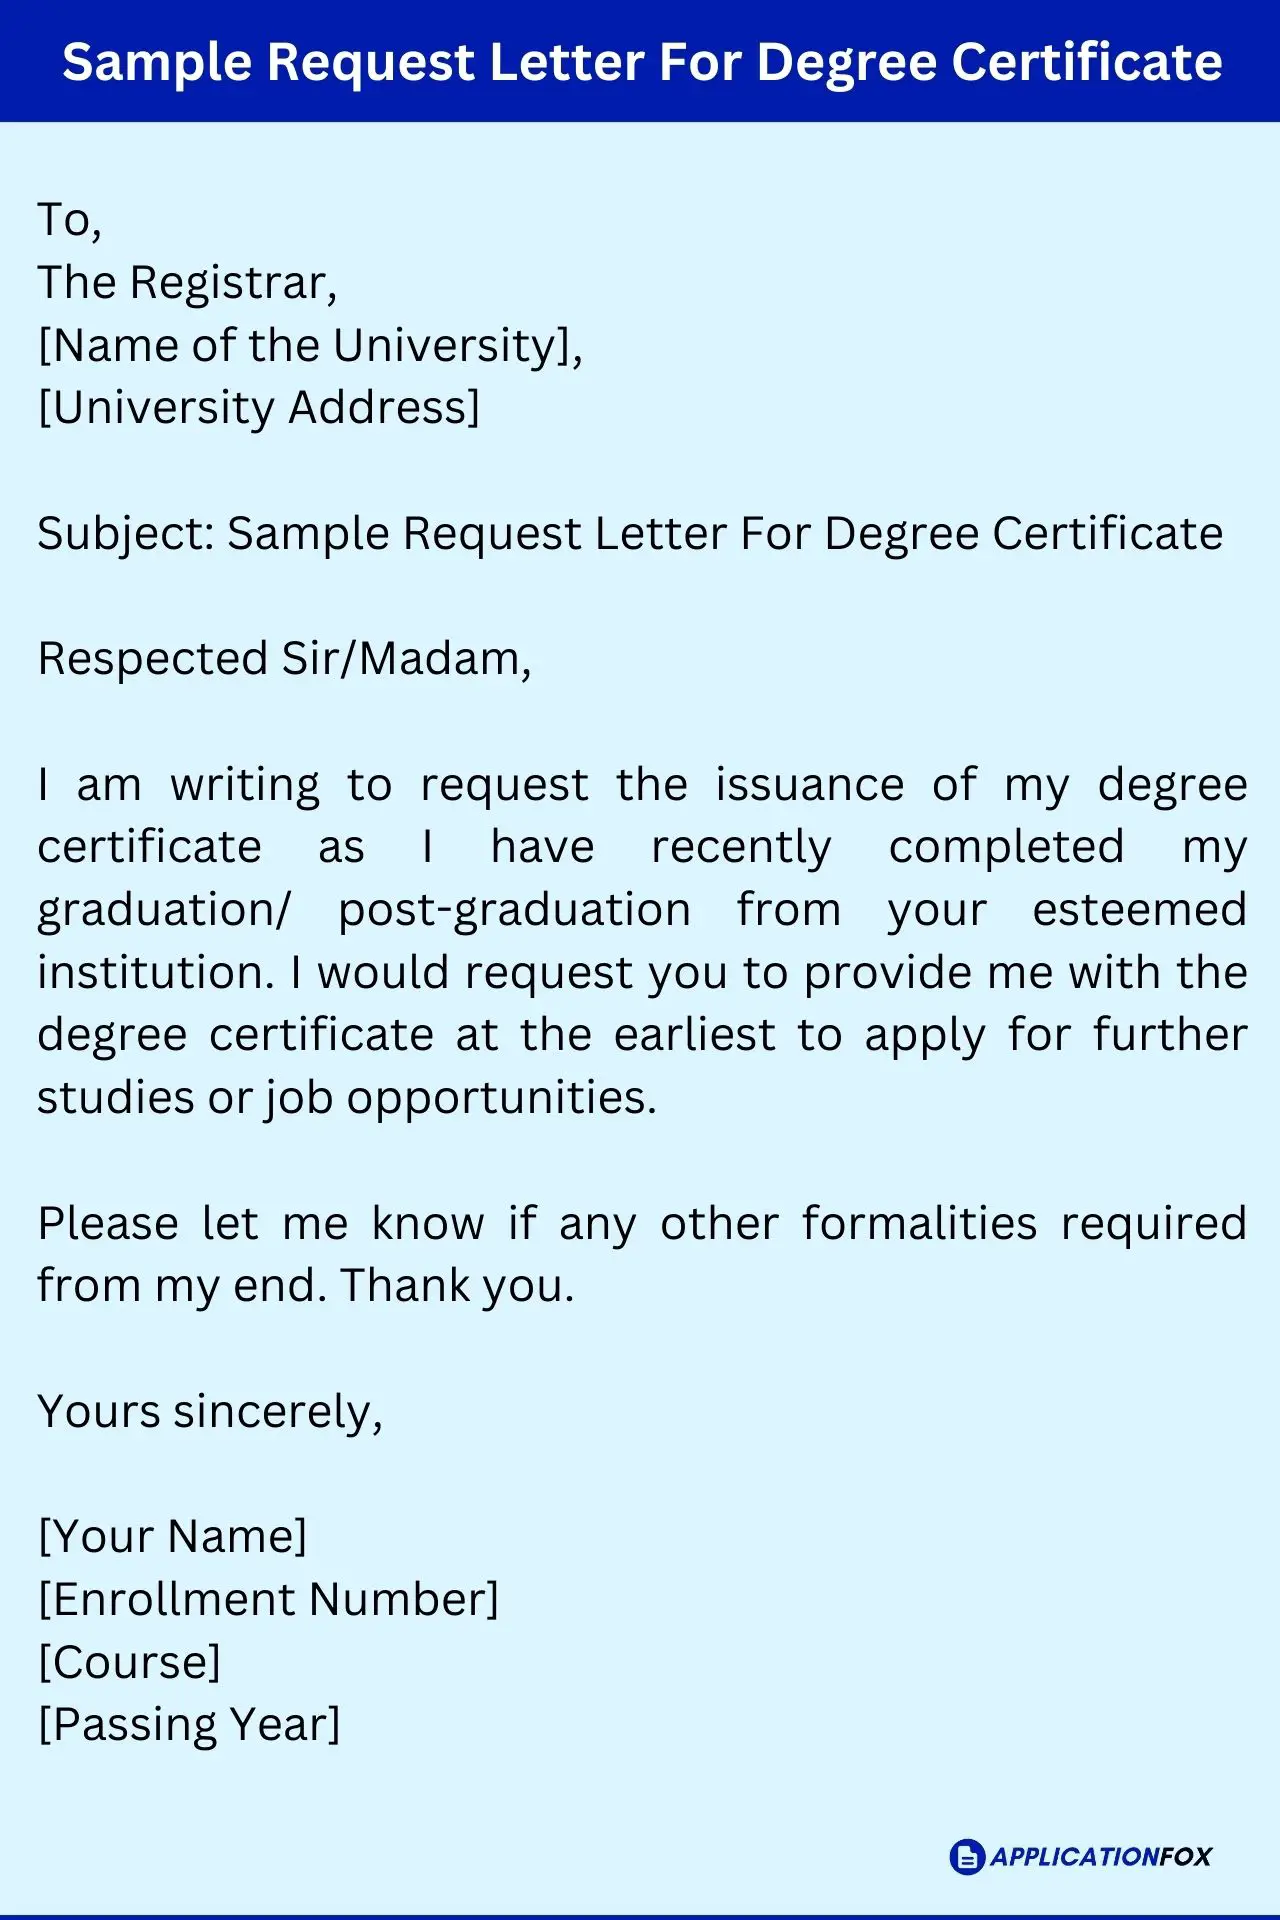 how to write an application letter for a diploma course